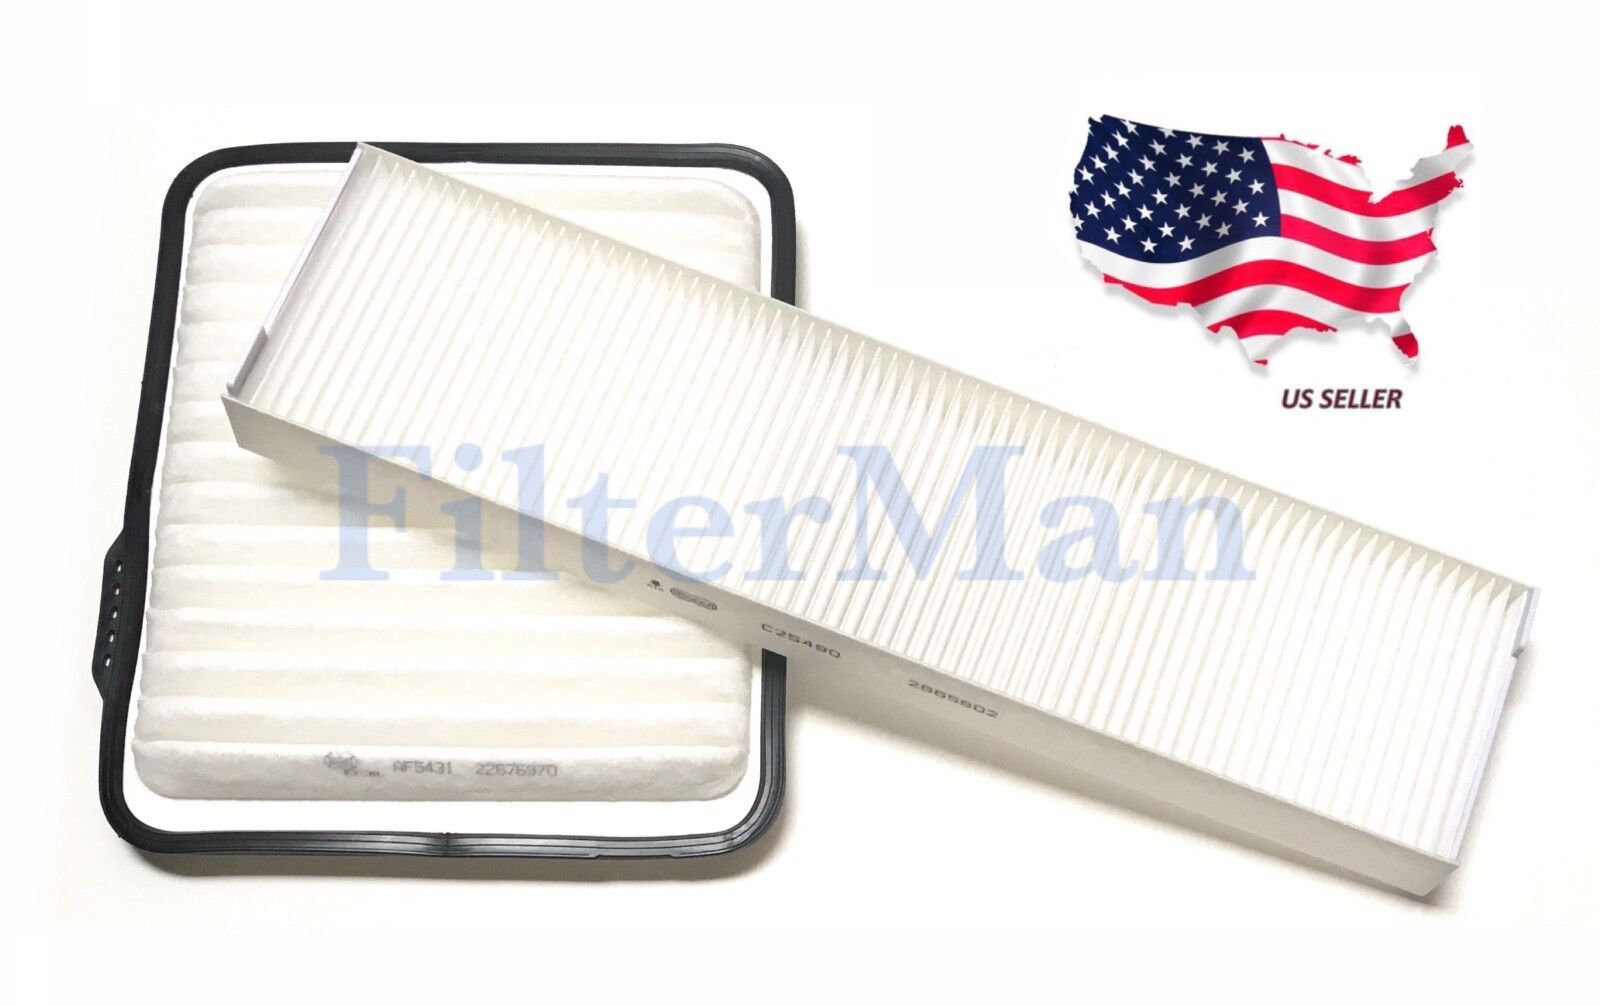 Engine&Cabin Air Filter For Chevy Equinox Pontiac Torrent Saturn Vue US Seller